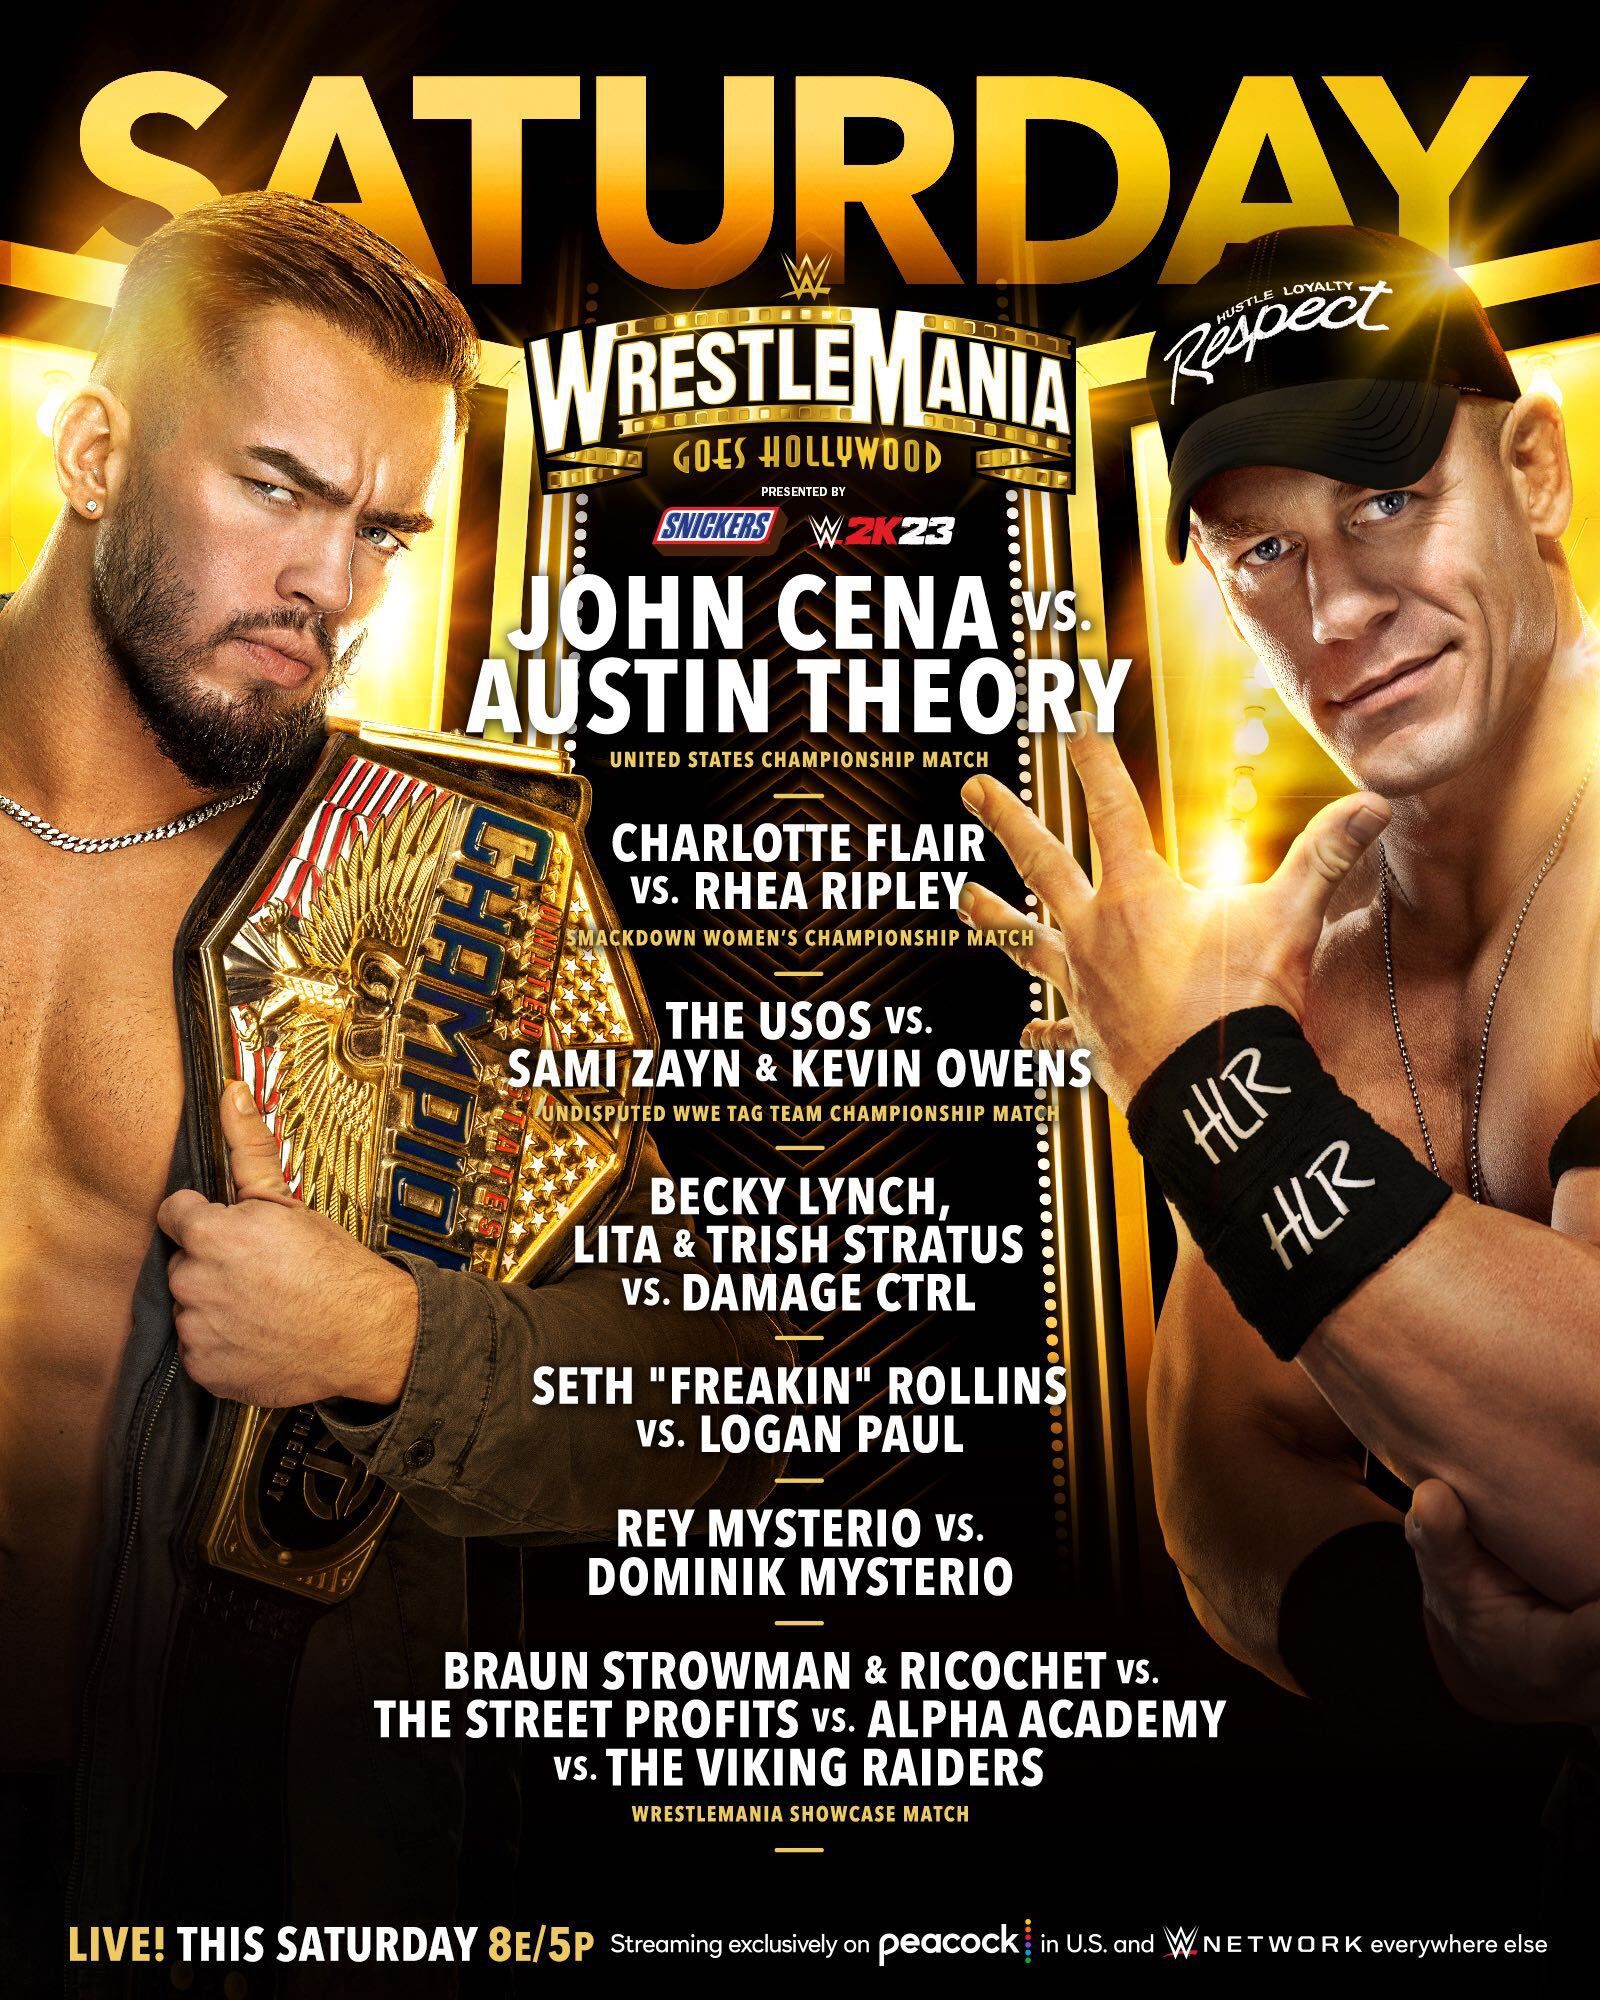 2023 WrestleMania 39 Preview All you need to know (Date, Location